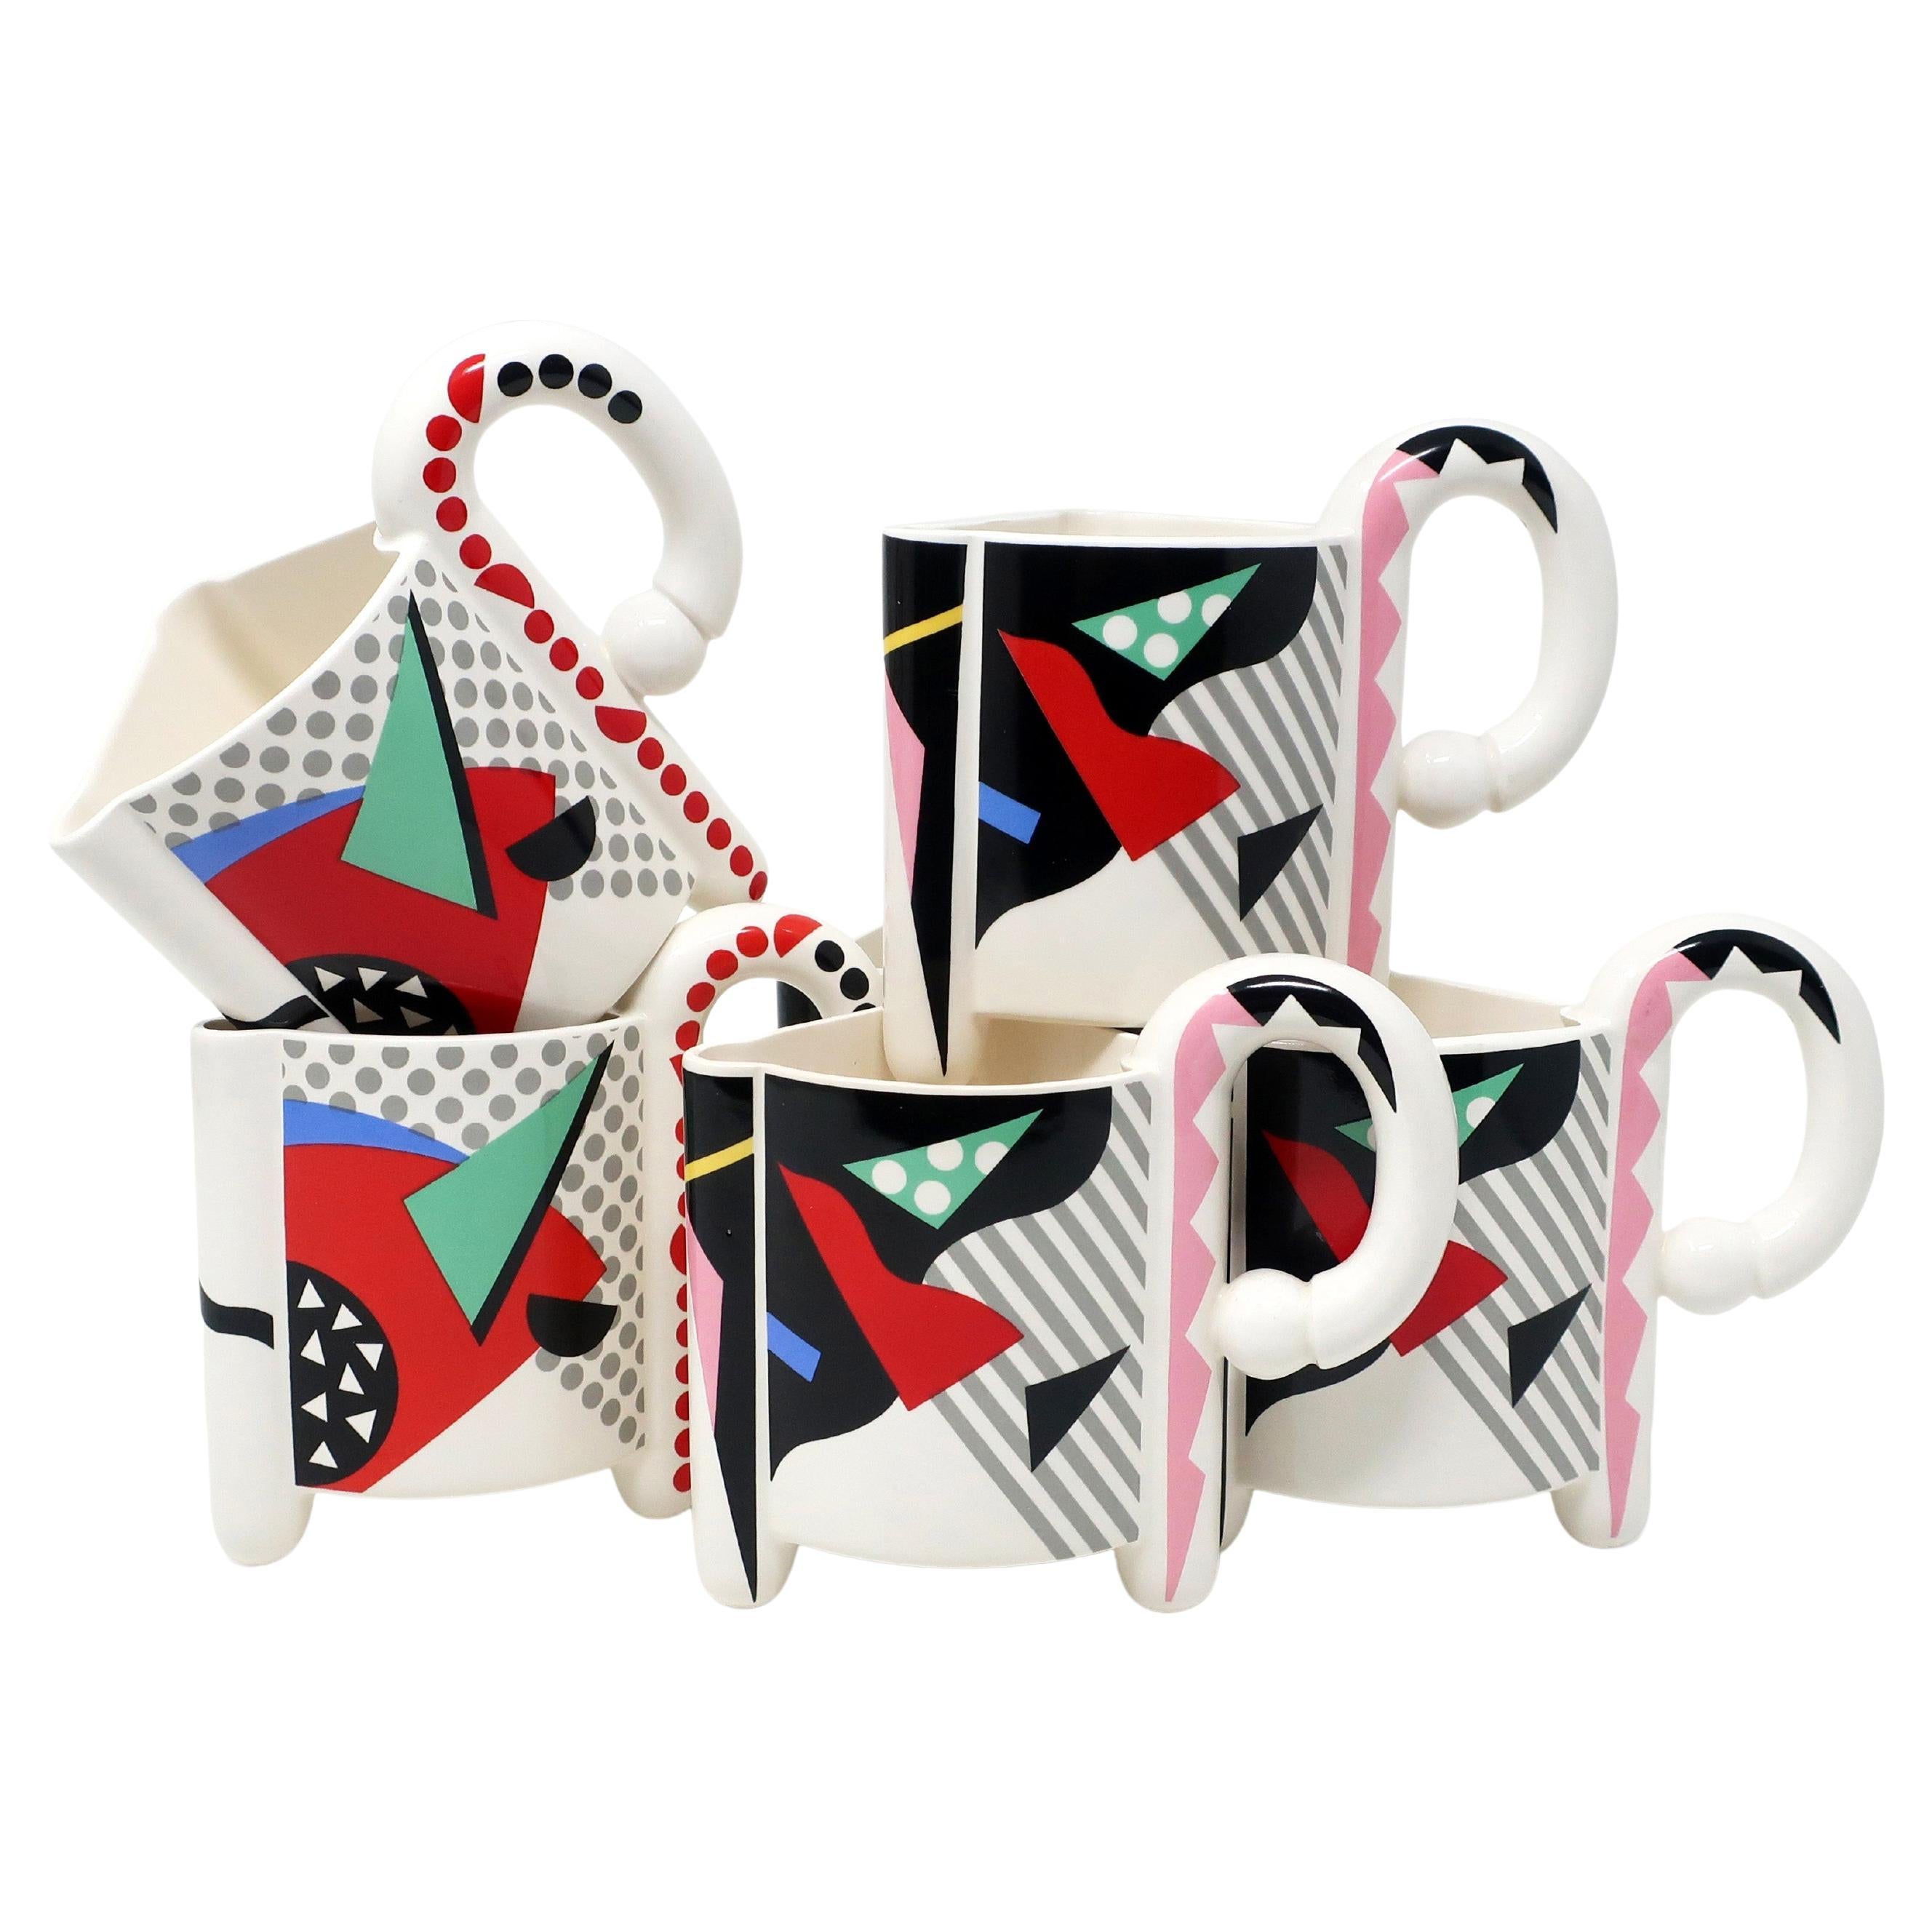 A set of six ceramic mugs in the Carnival pattern for Kato Kogei’s Fujimori Collection. Fujimori was born in Japan in 1935 and won the National Art Award when he was just 19. He later worked in Chicago as a ceramics designer before returning to